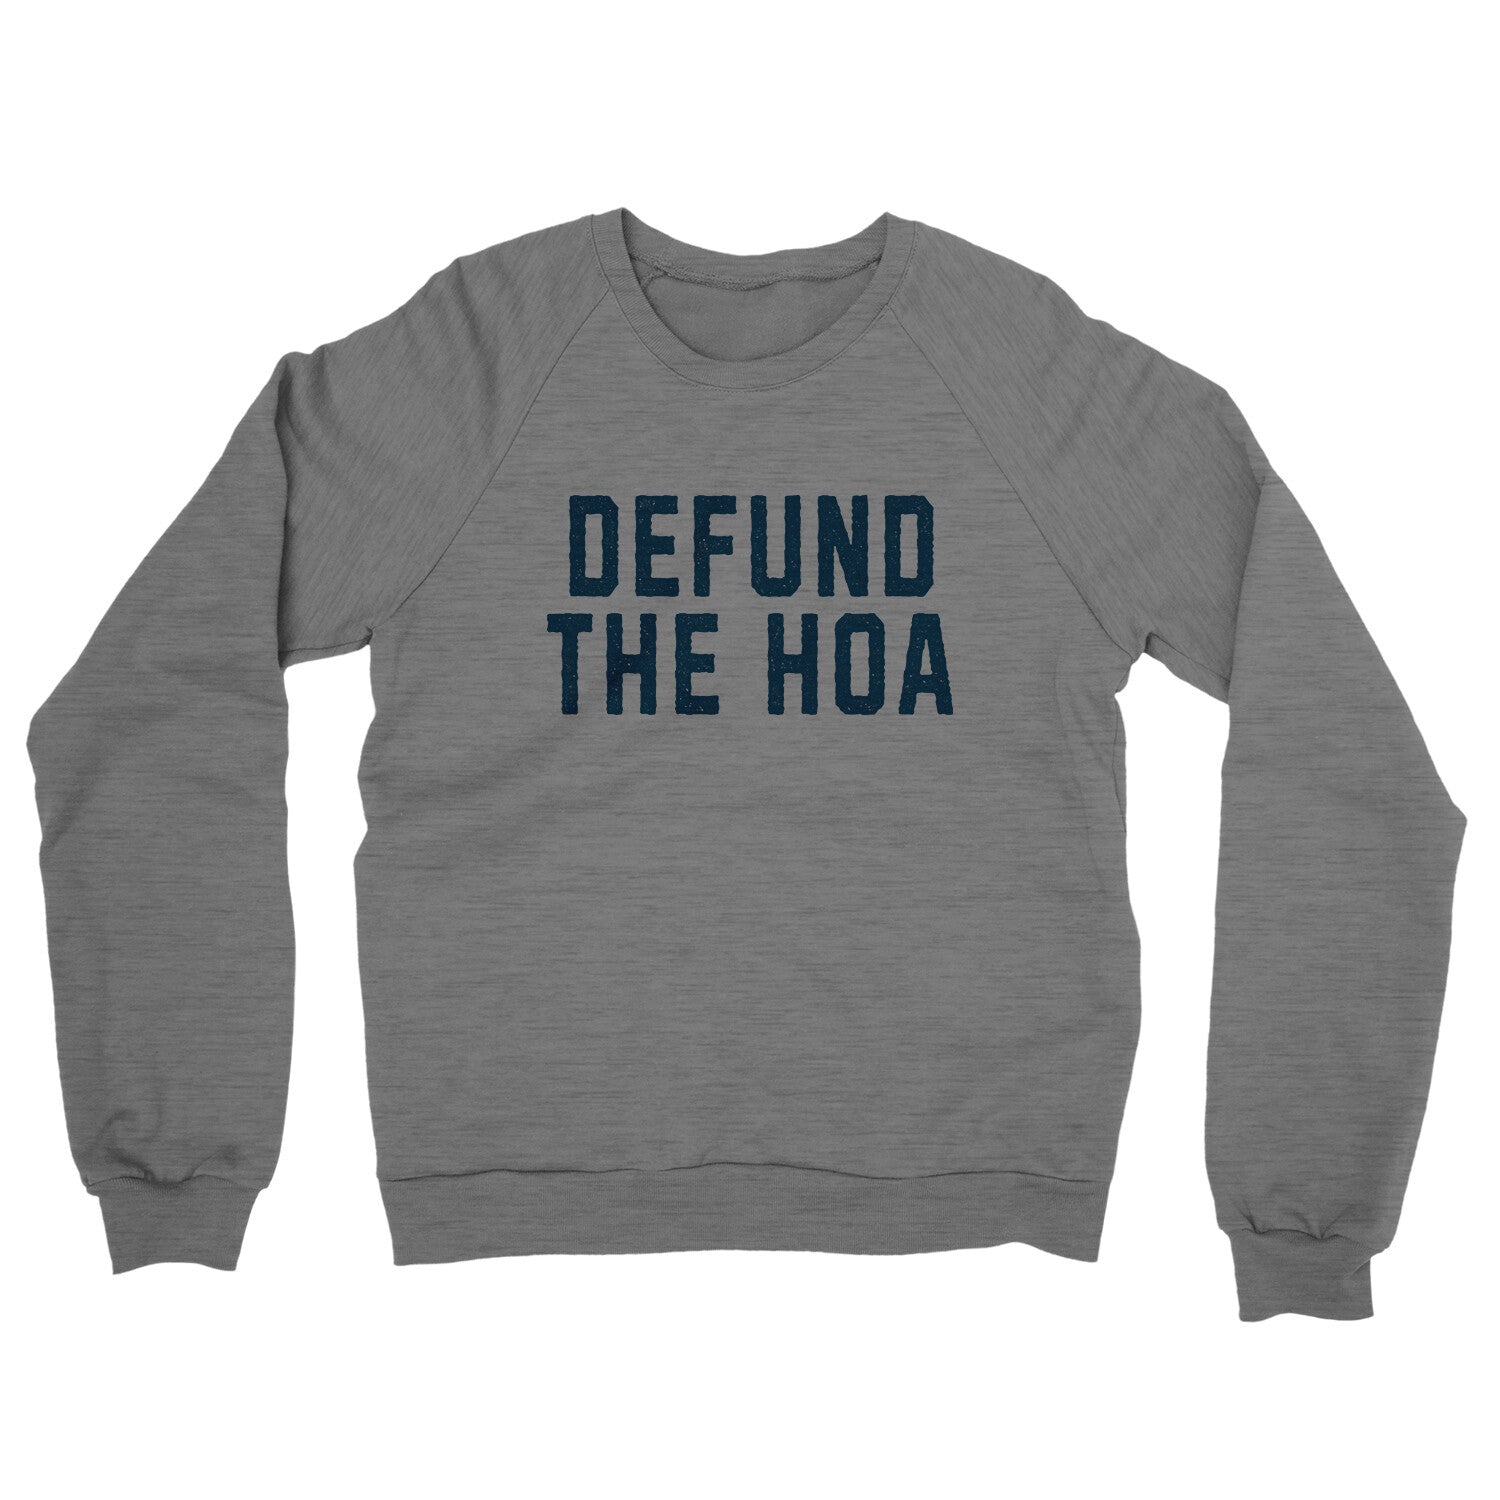 Defund the HOA in Graphite Heather Color